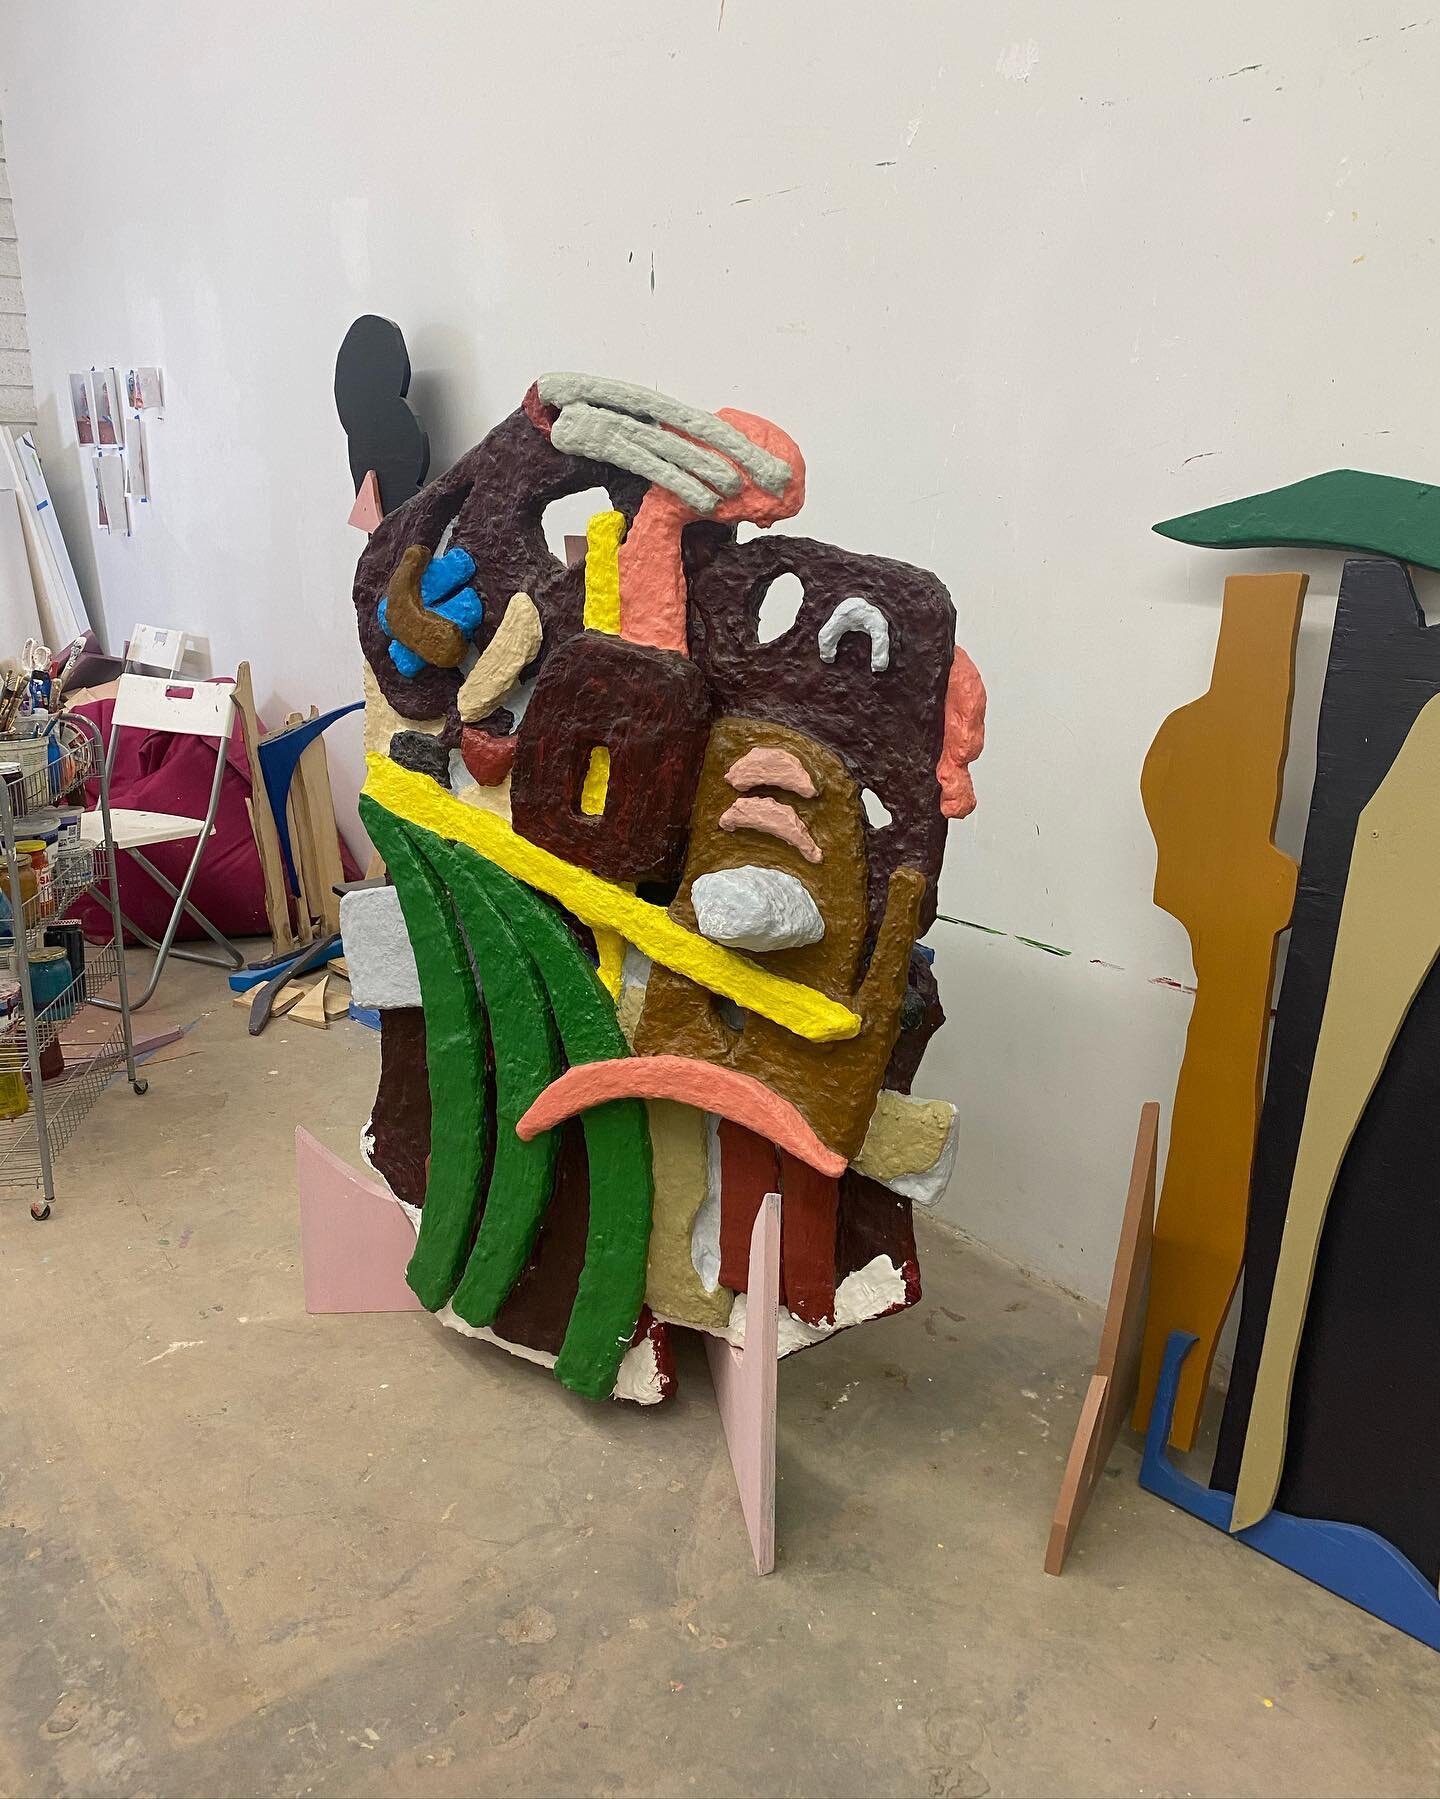 STUDIO VISIT with the playful @megan_e_reed 

Megan Reed uses sculpture as a vehicle to create spaces for joy, communion, and immersion in color. Rooted in the fun of making collage and bricolage, using some materials at hand, her work pushes the bou